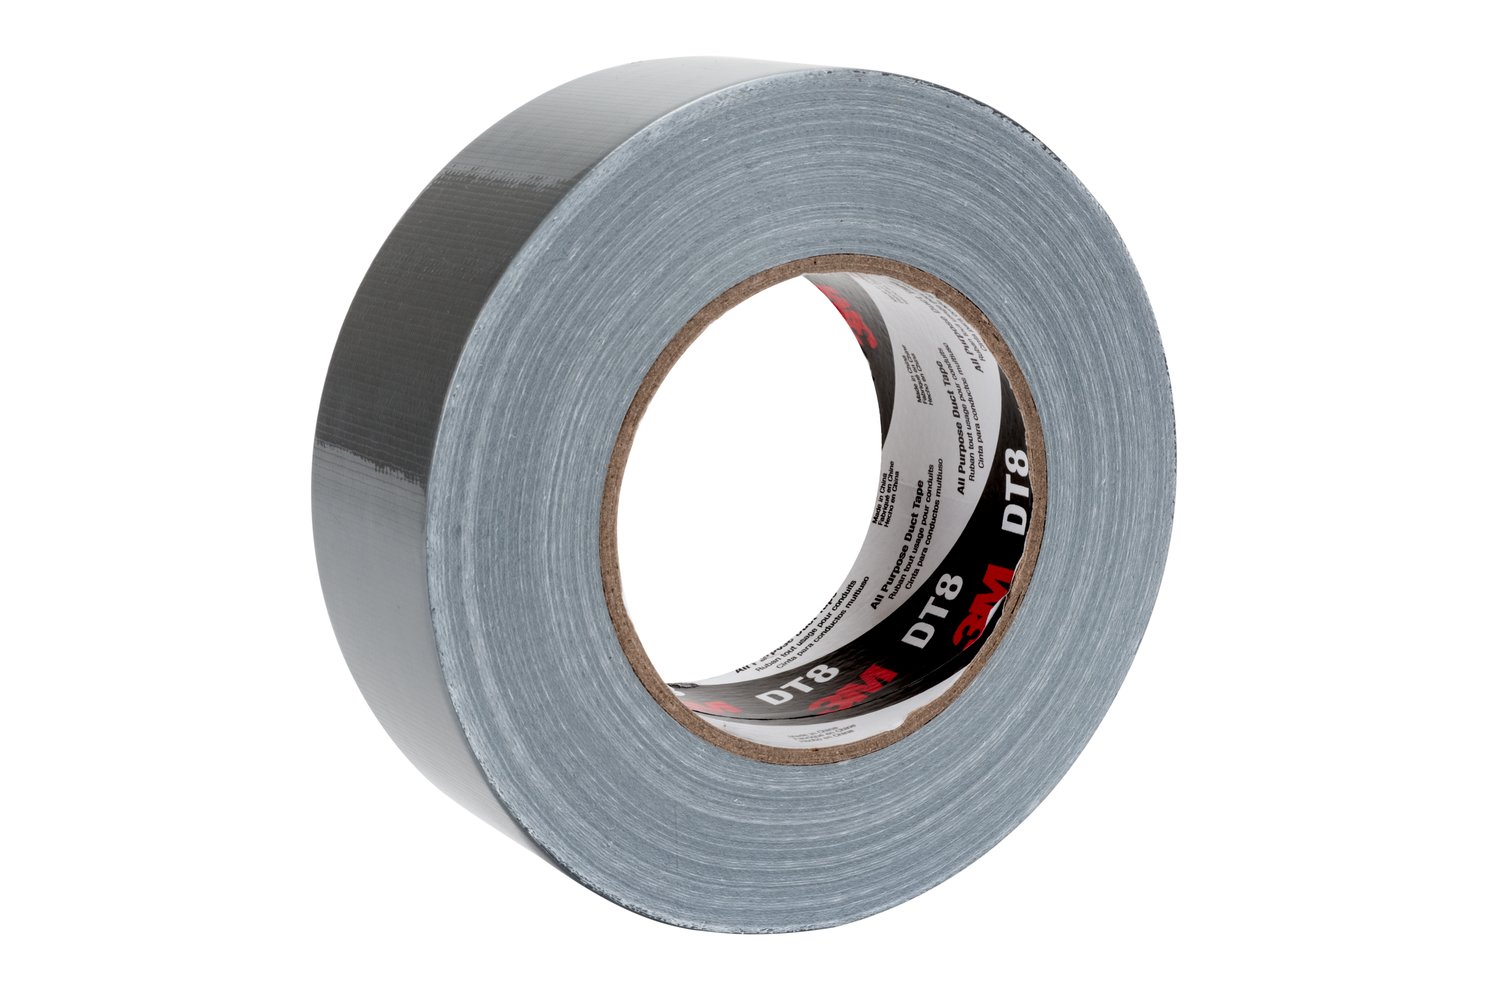 7100158345 - 3M All Purpose Duct Tape DT8, Silver, 48 mm x 54.8 m, 8 mil, 24
Roll/Case, Individually Wrapped Conveniently Packaged